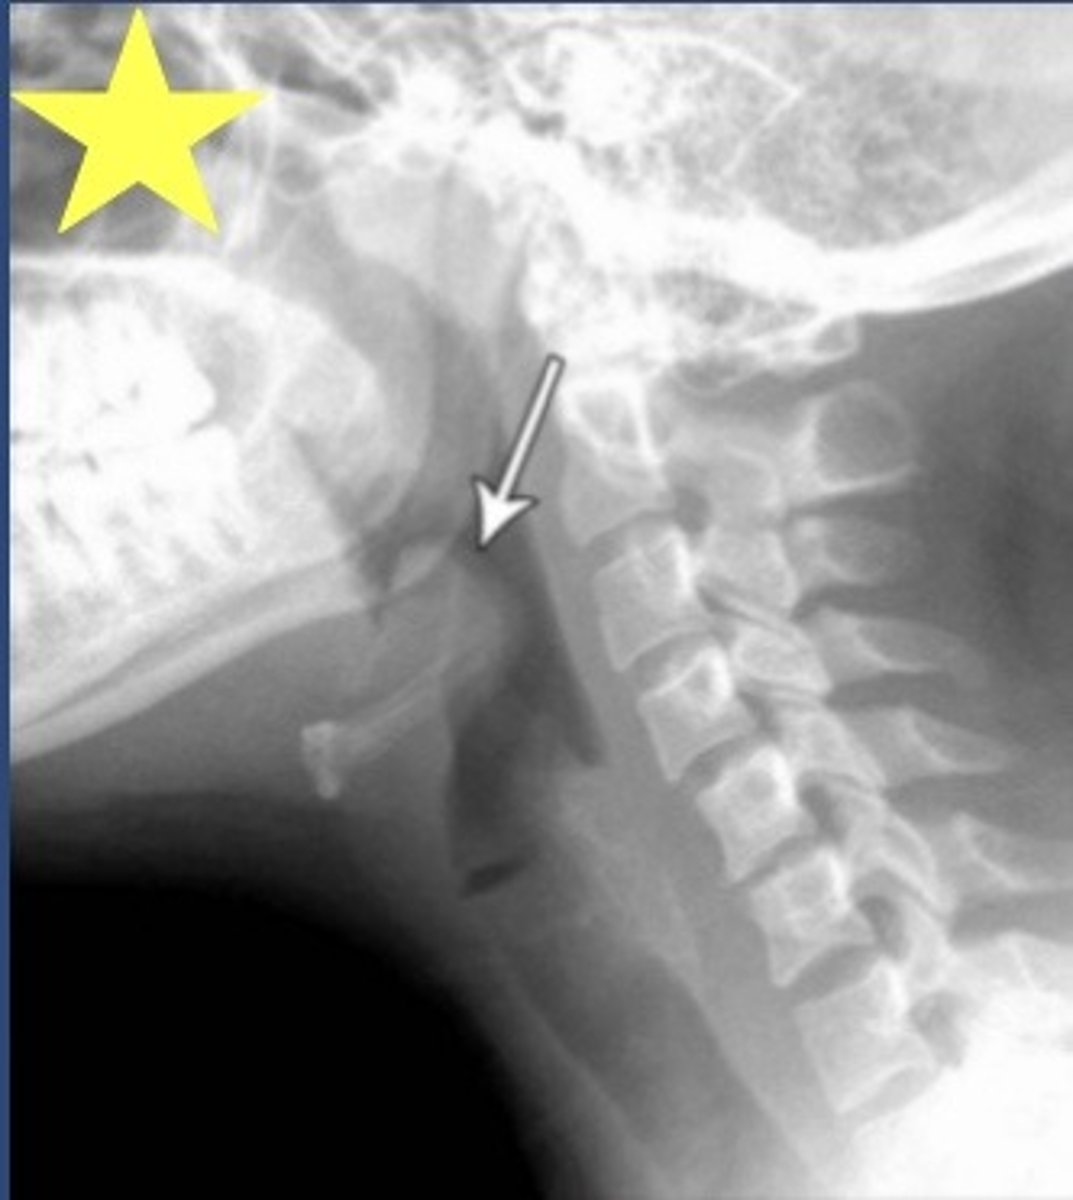 <p>Identify the radiographic abnormality.</p>